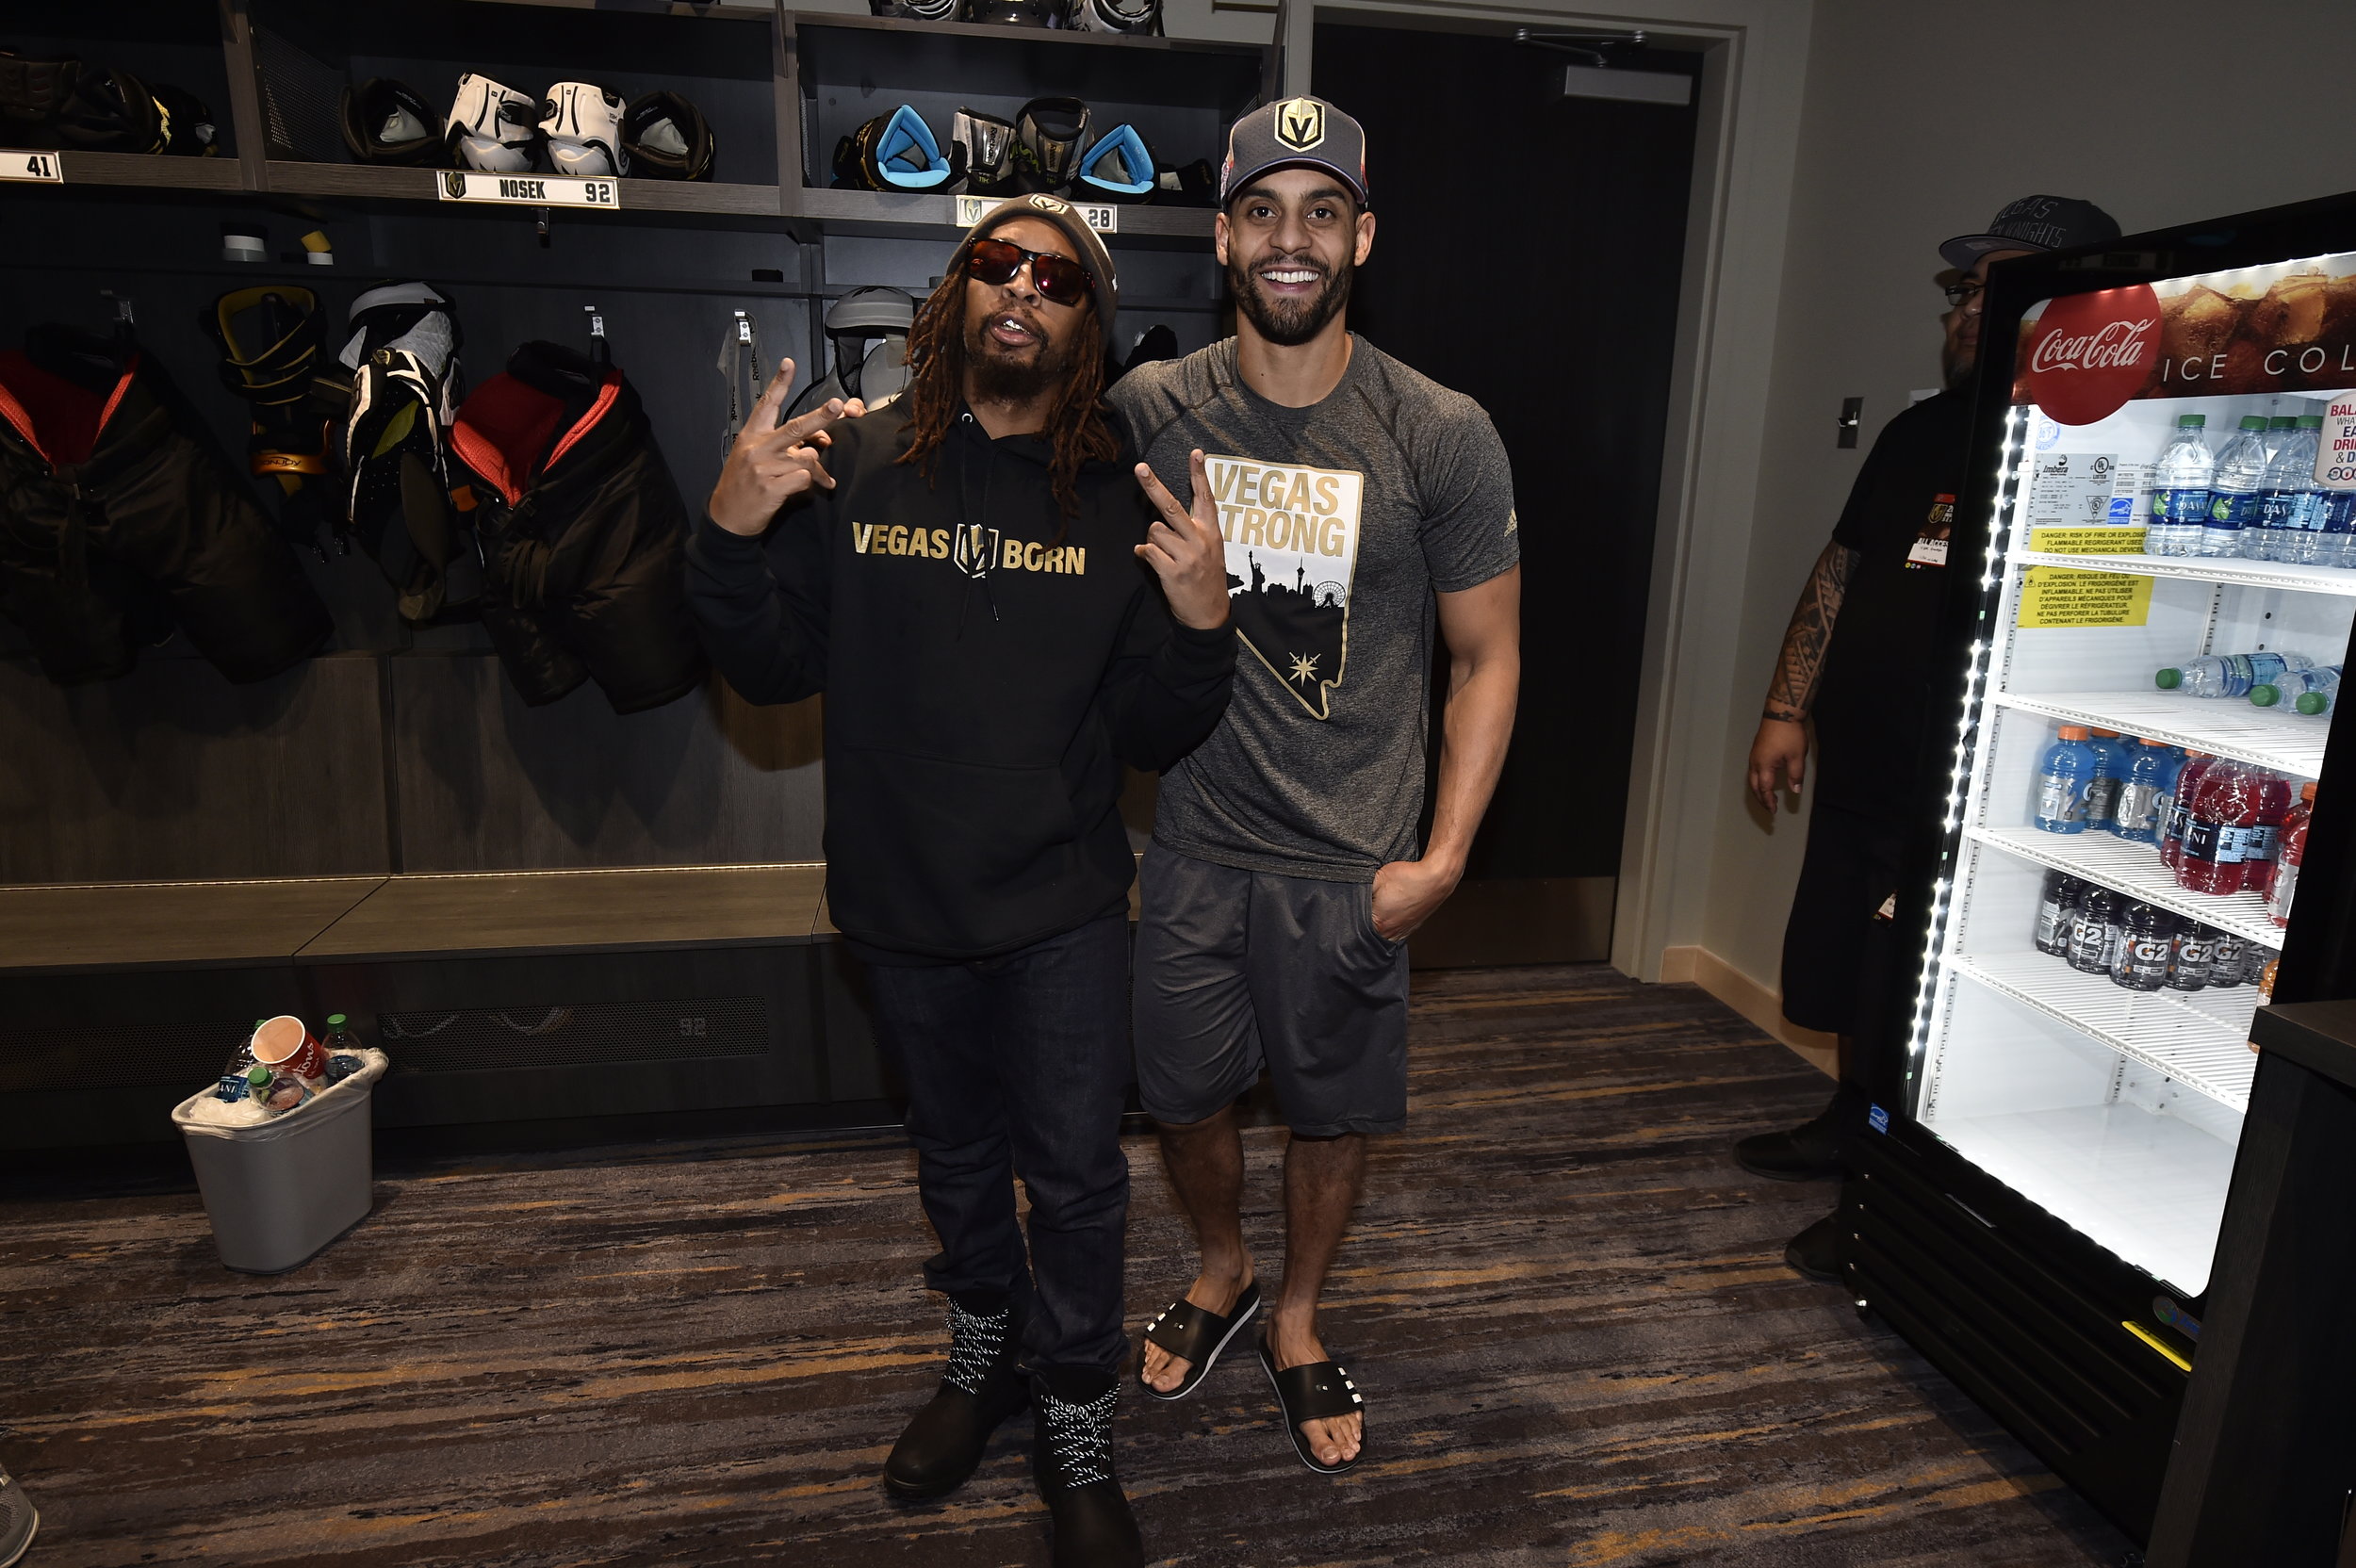 NHL playoffs: From Harper to Lil Jon, everyone in on Golden Knights